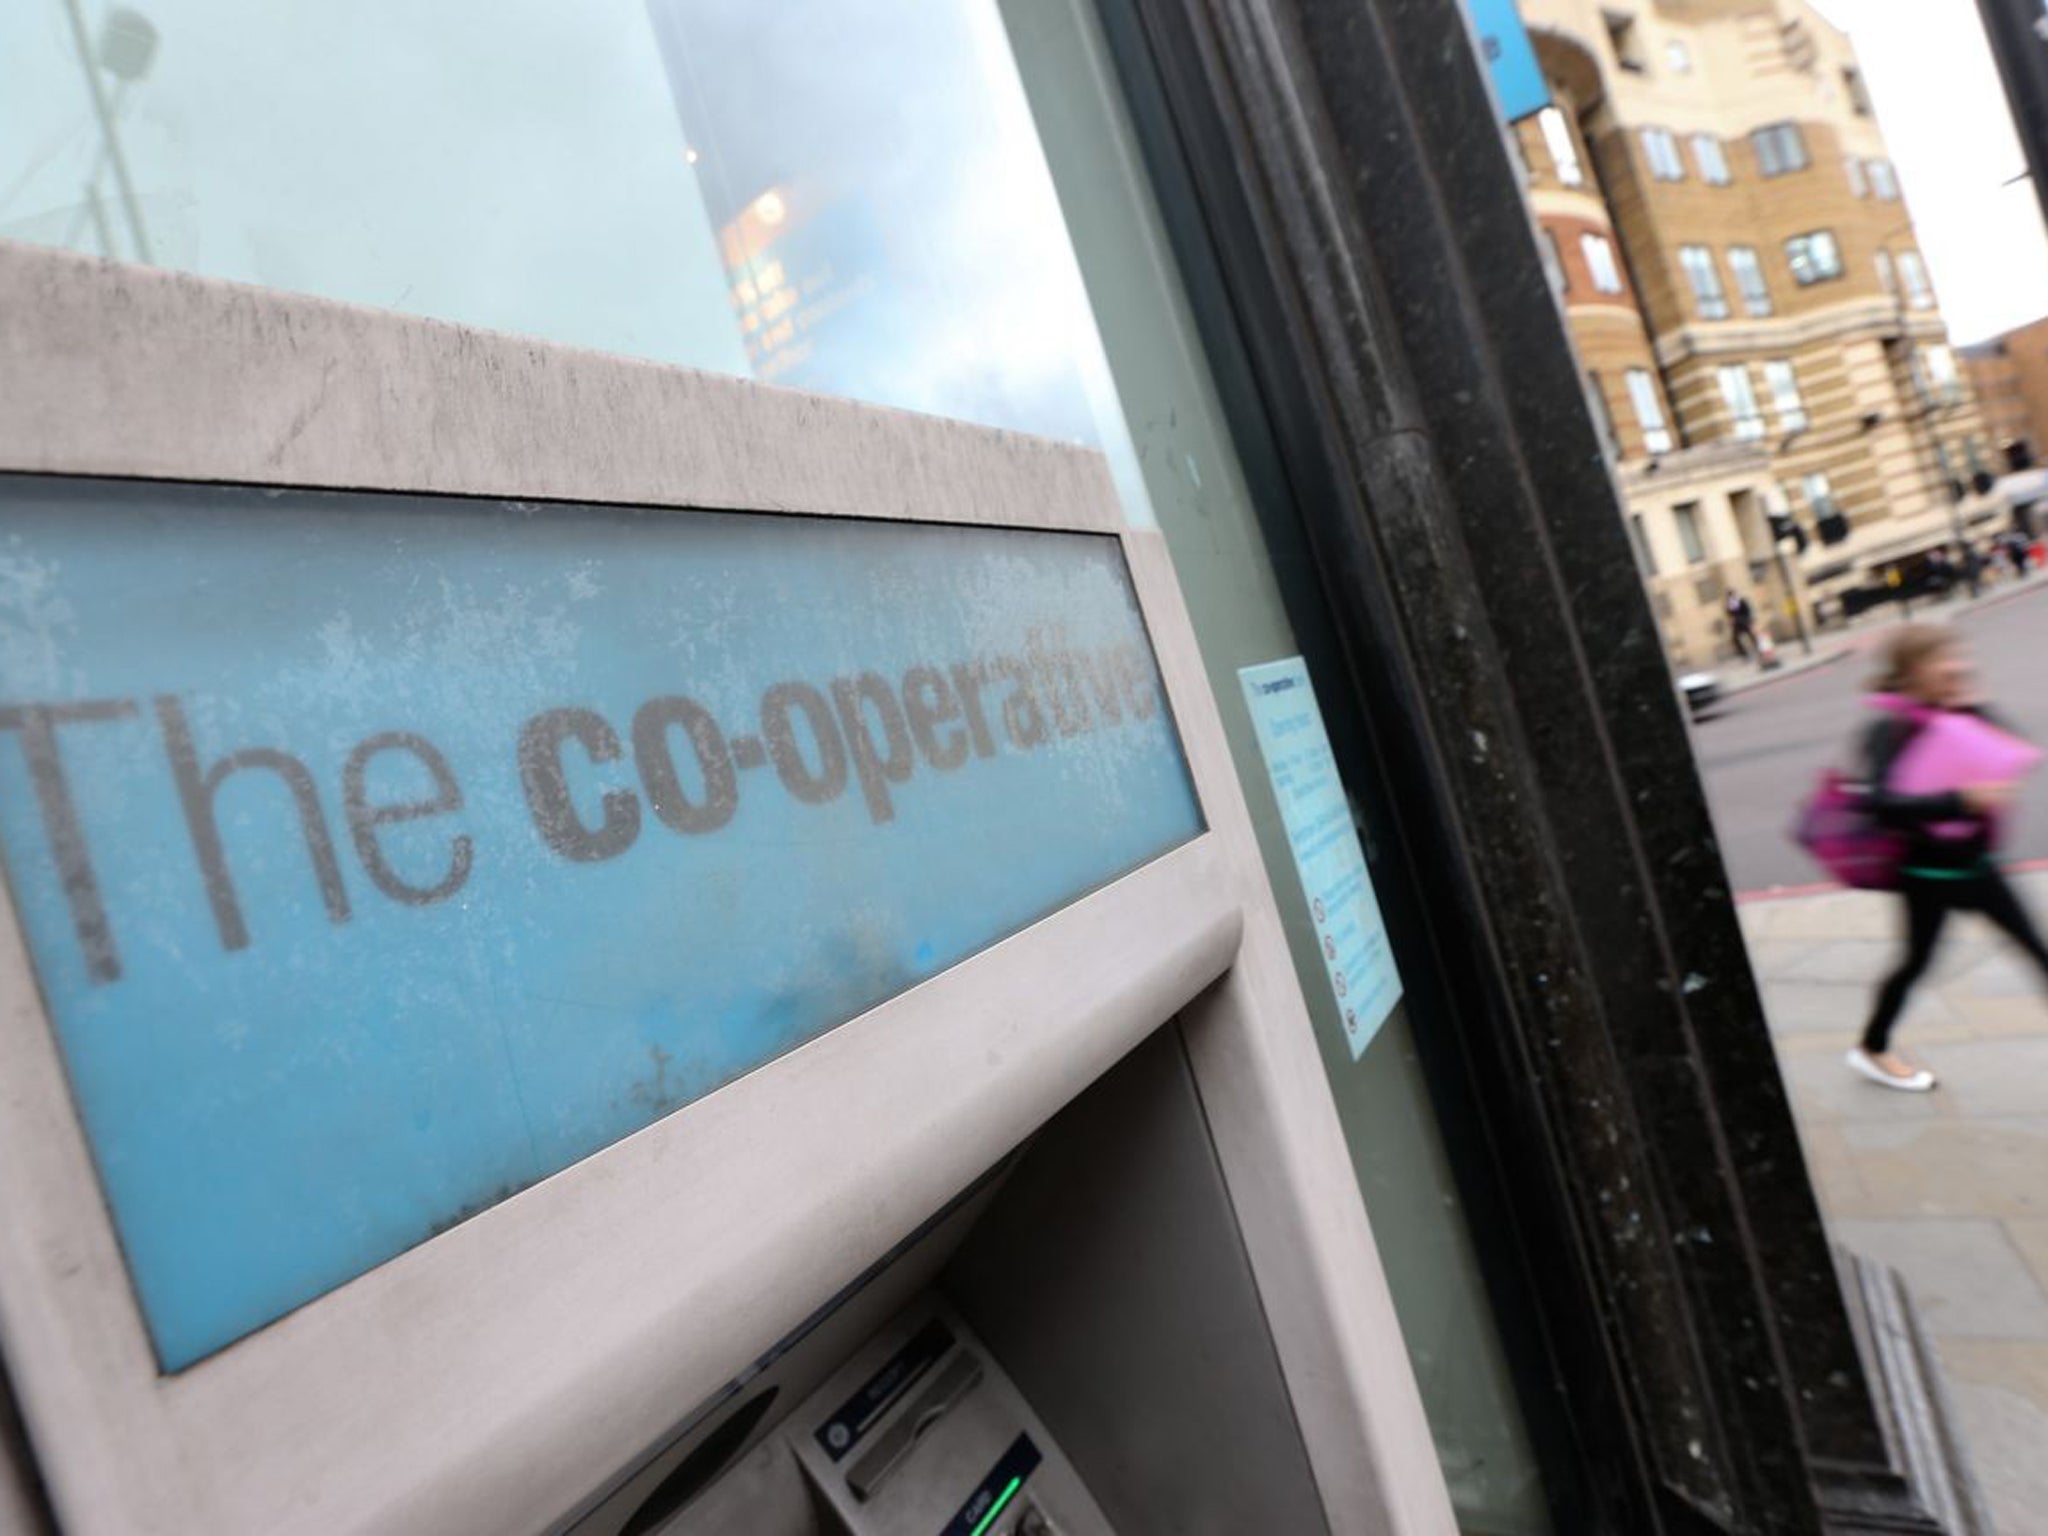 Questions have to be asked over why the pretence of the Co-op-Lloyds deal was kept going for so long